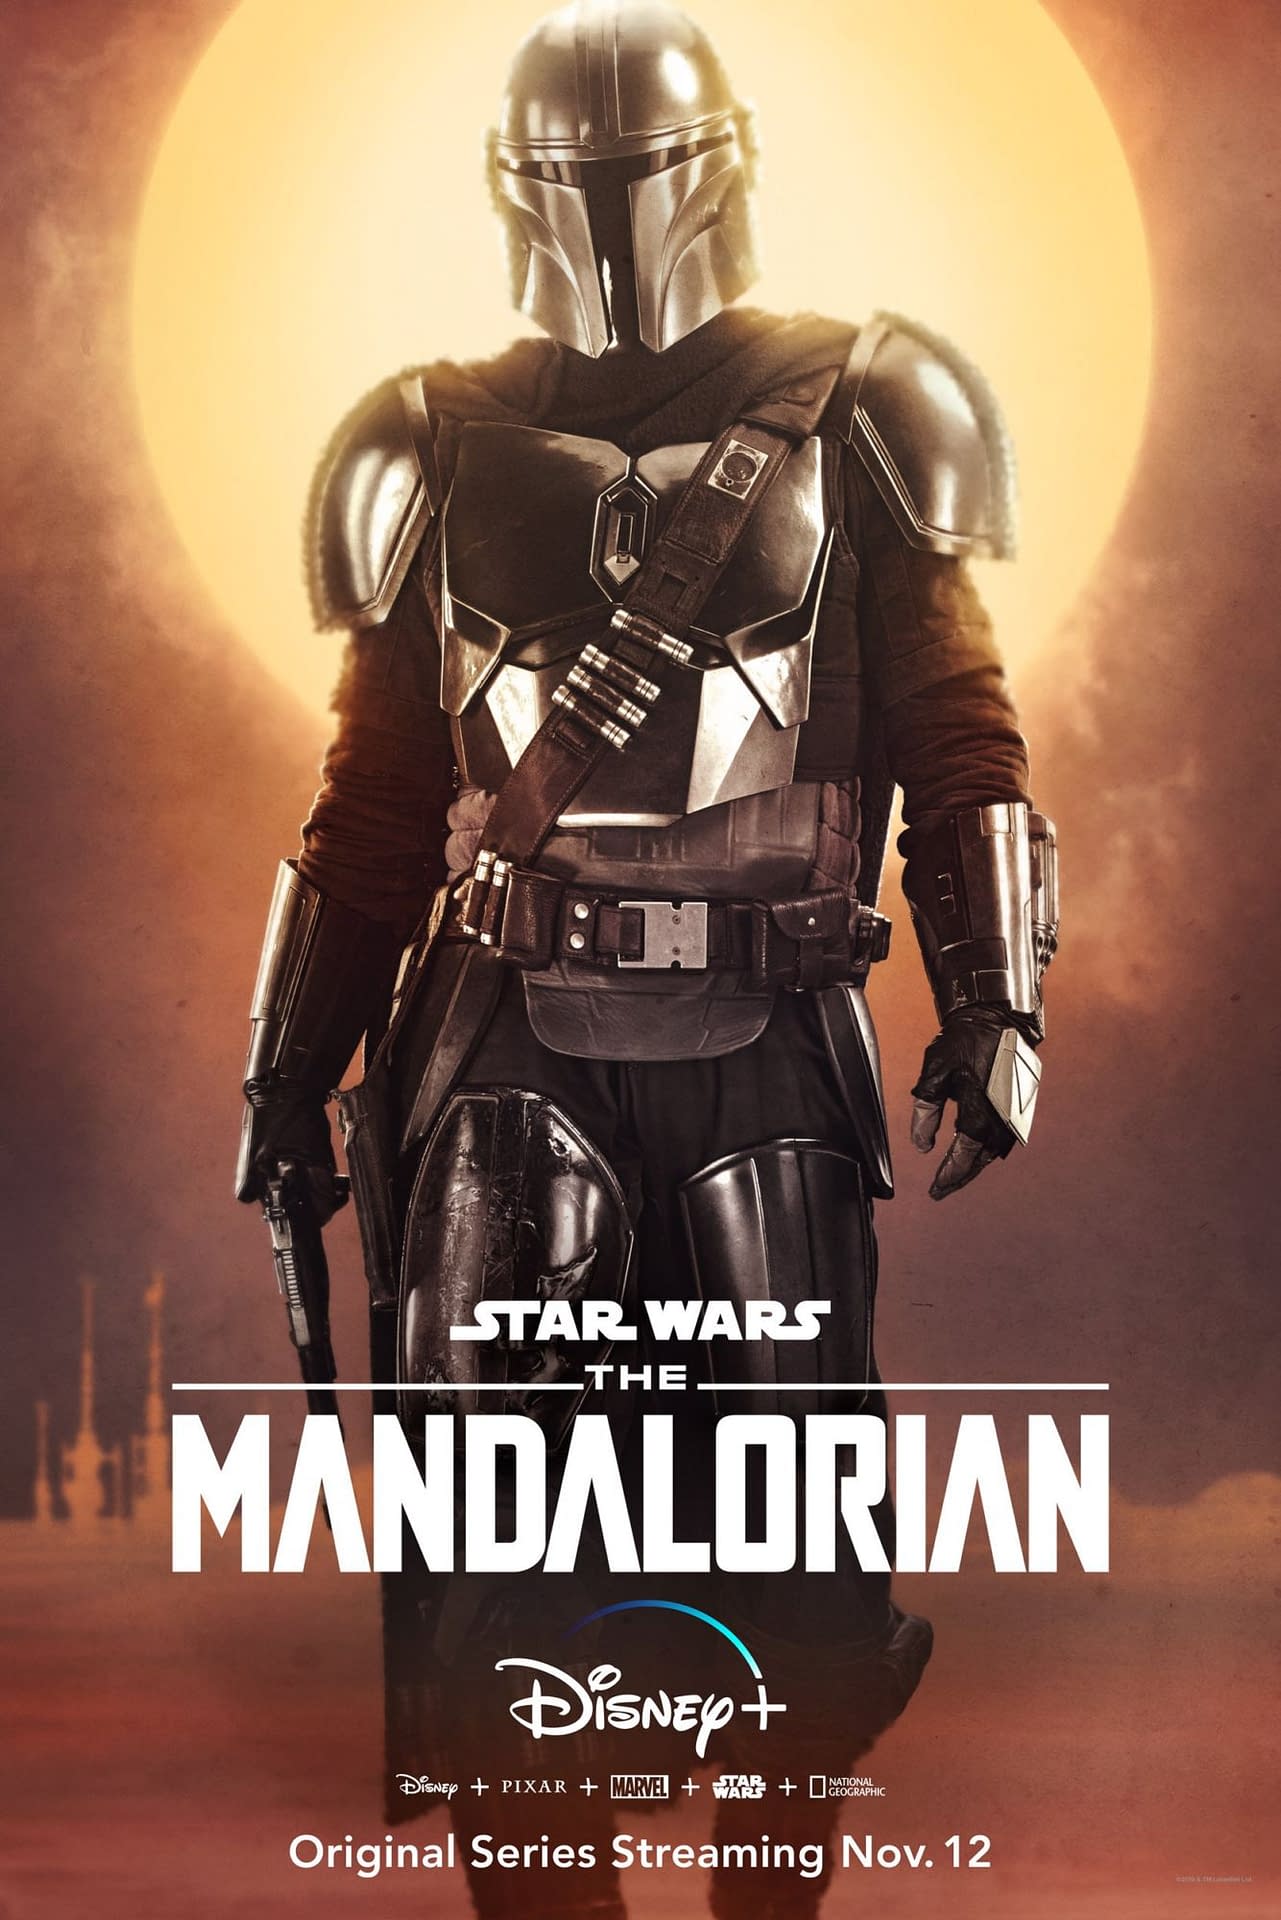 "The Mandalorian": Disney+ Blasts Out Sneak Preview During "MNF" [VIDEO]